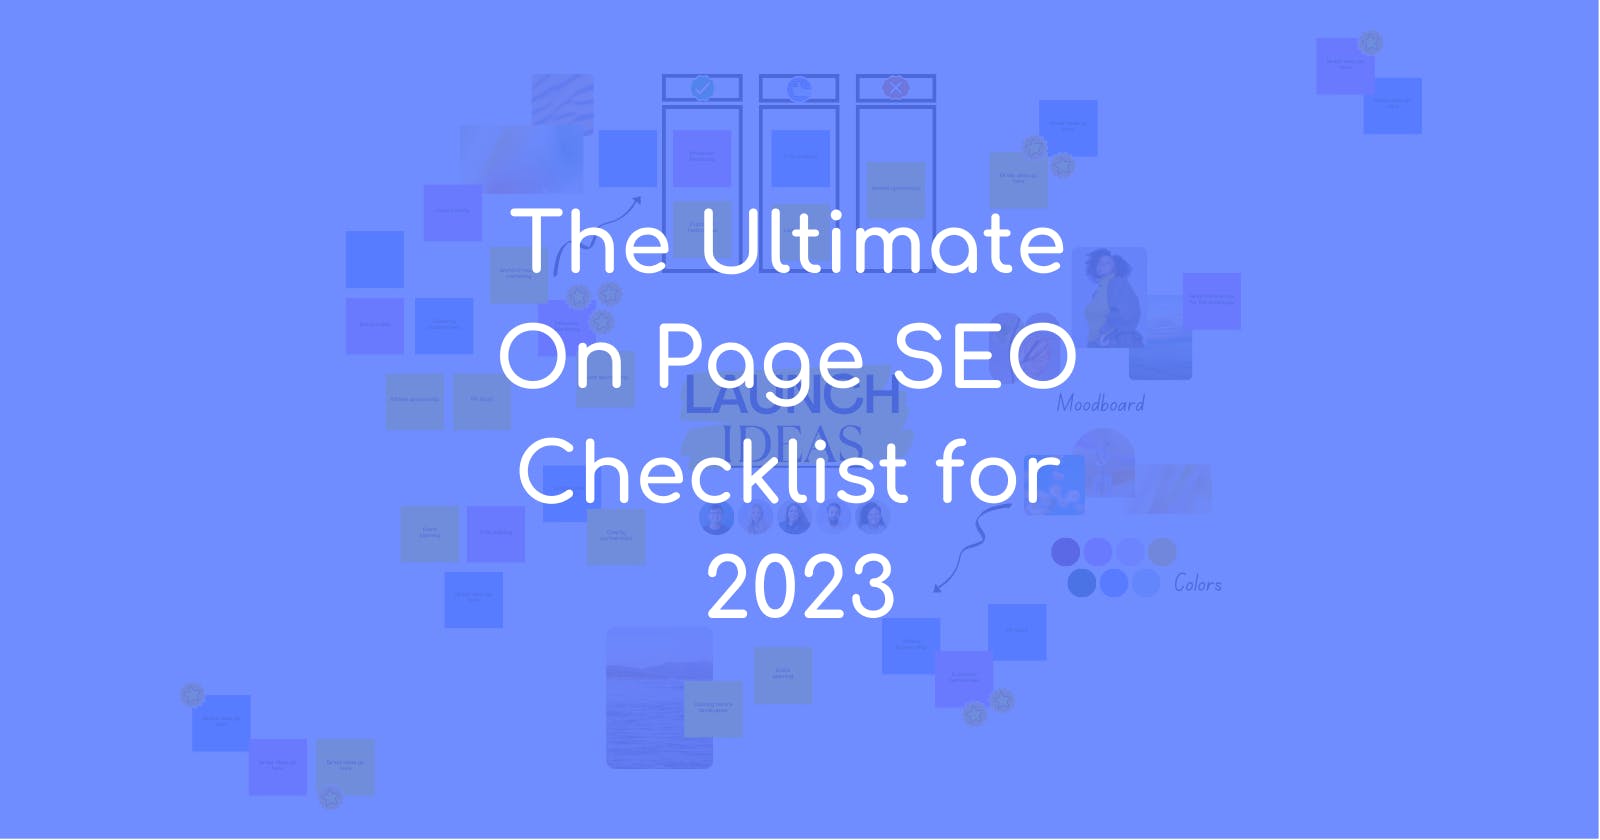 The Ultimate on Page SEO Checklist for 2023